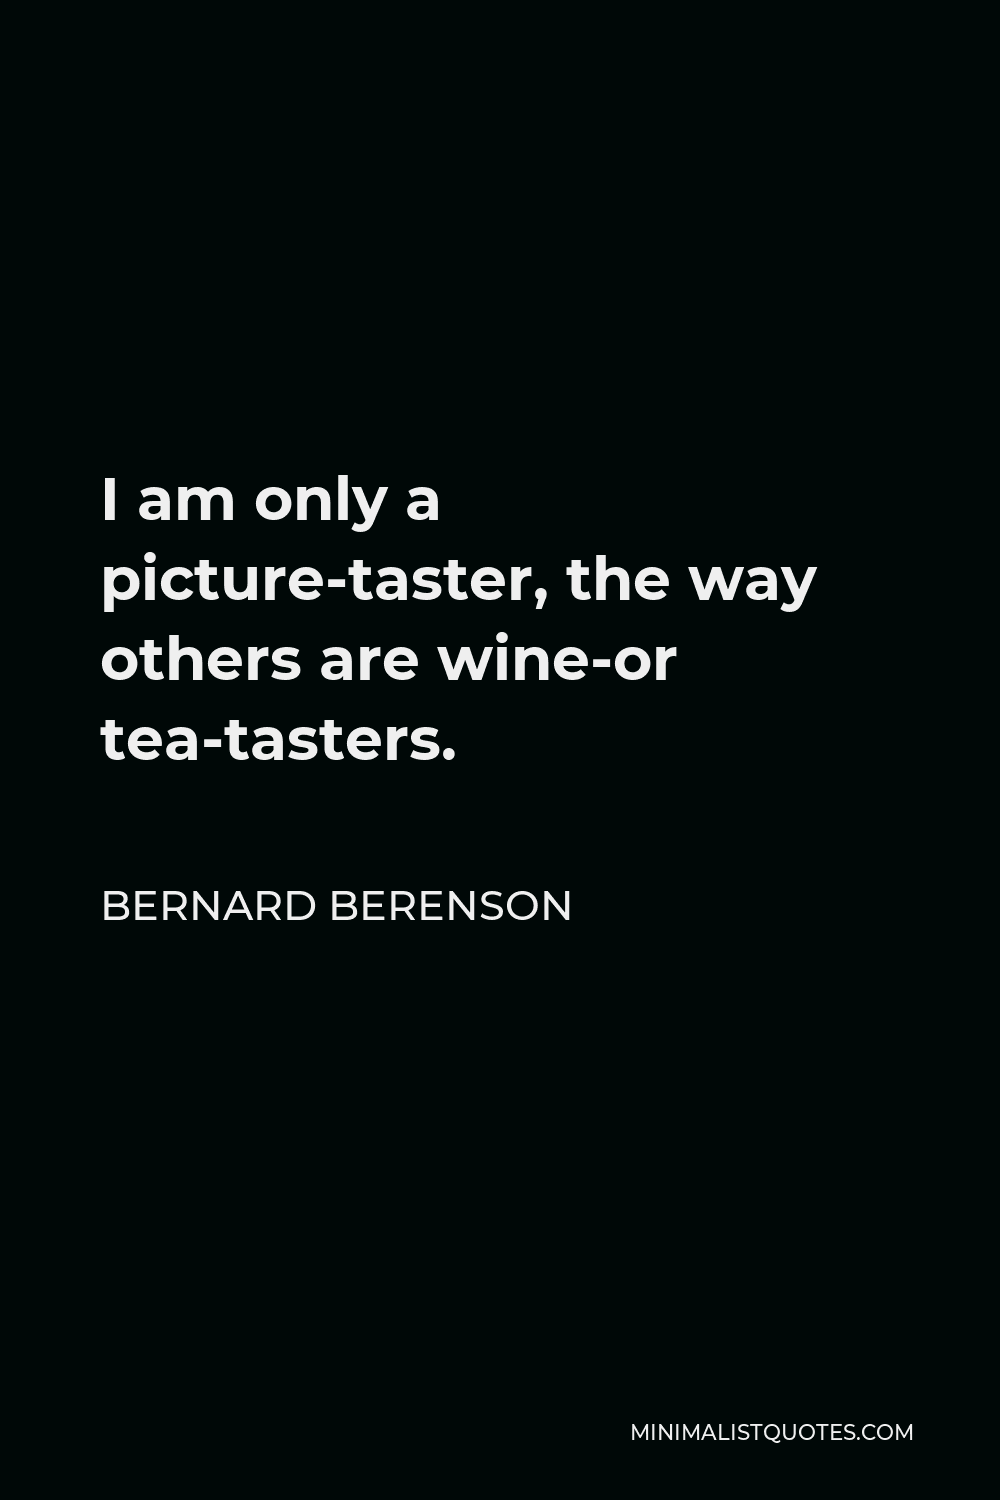 Bernard Berenson Quote - I am only a picture-taster, the way others are wine-or tea-tasters.